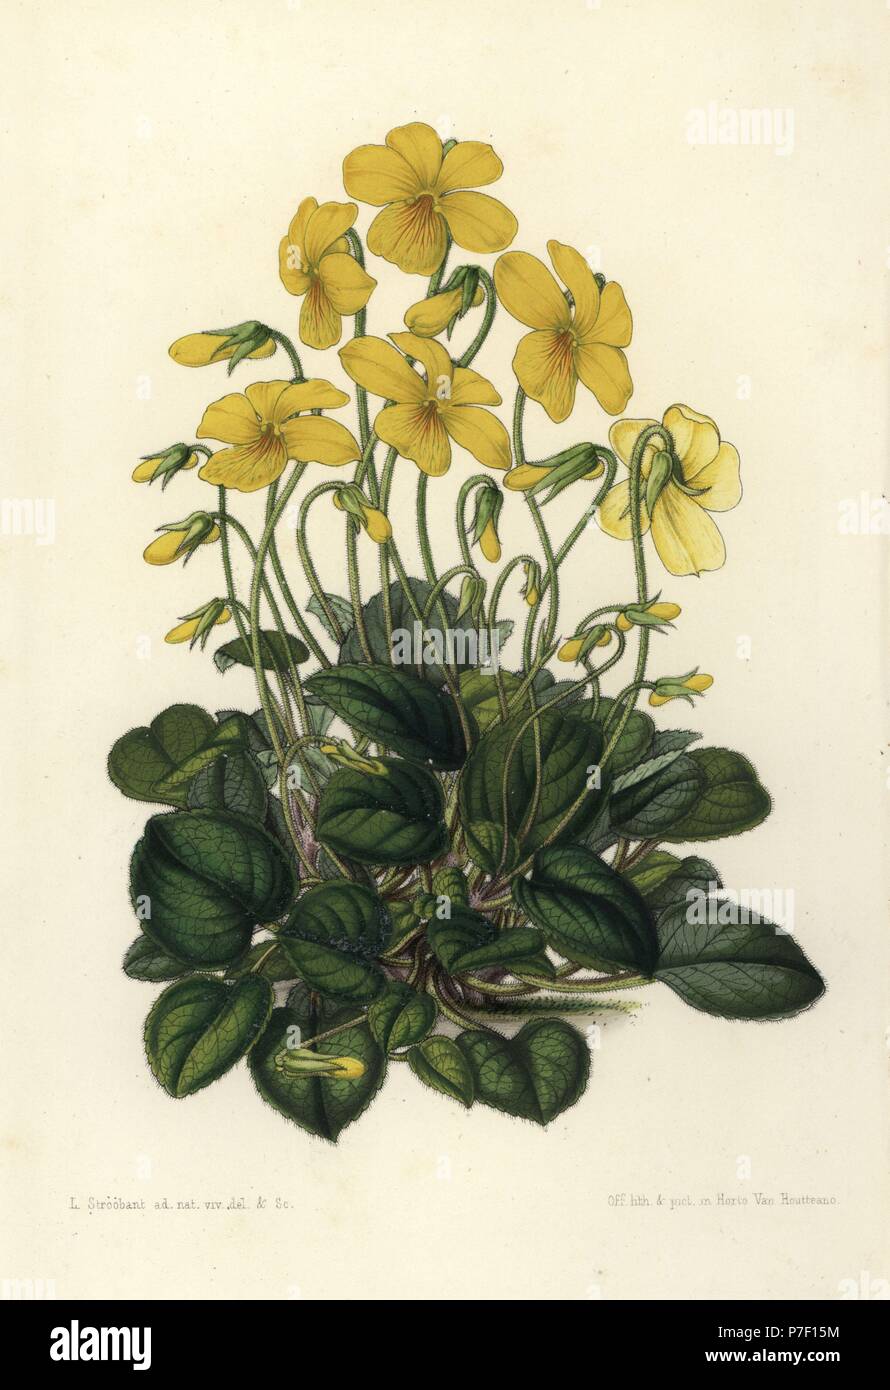 Mountain pansy, Viola lutea (Viola pyrolaefolia). Handcoloured lithograph by Stroobant from Louis van Houtte and Charles Lemaire's Flowers of the Gardens and Hothouses of Europe, Flore des Serres et des Jardins de l'Europe, Ghent, Belgium, 1851. Stock Photo